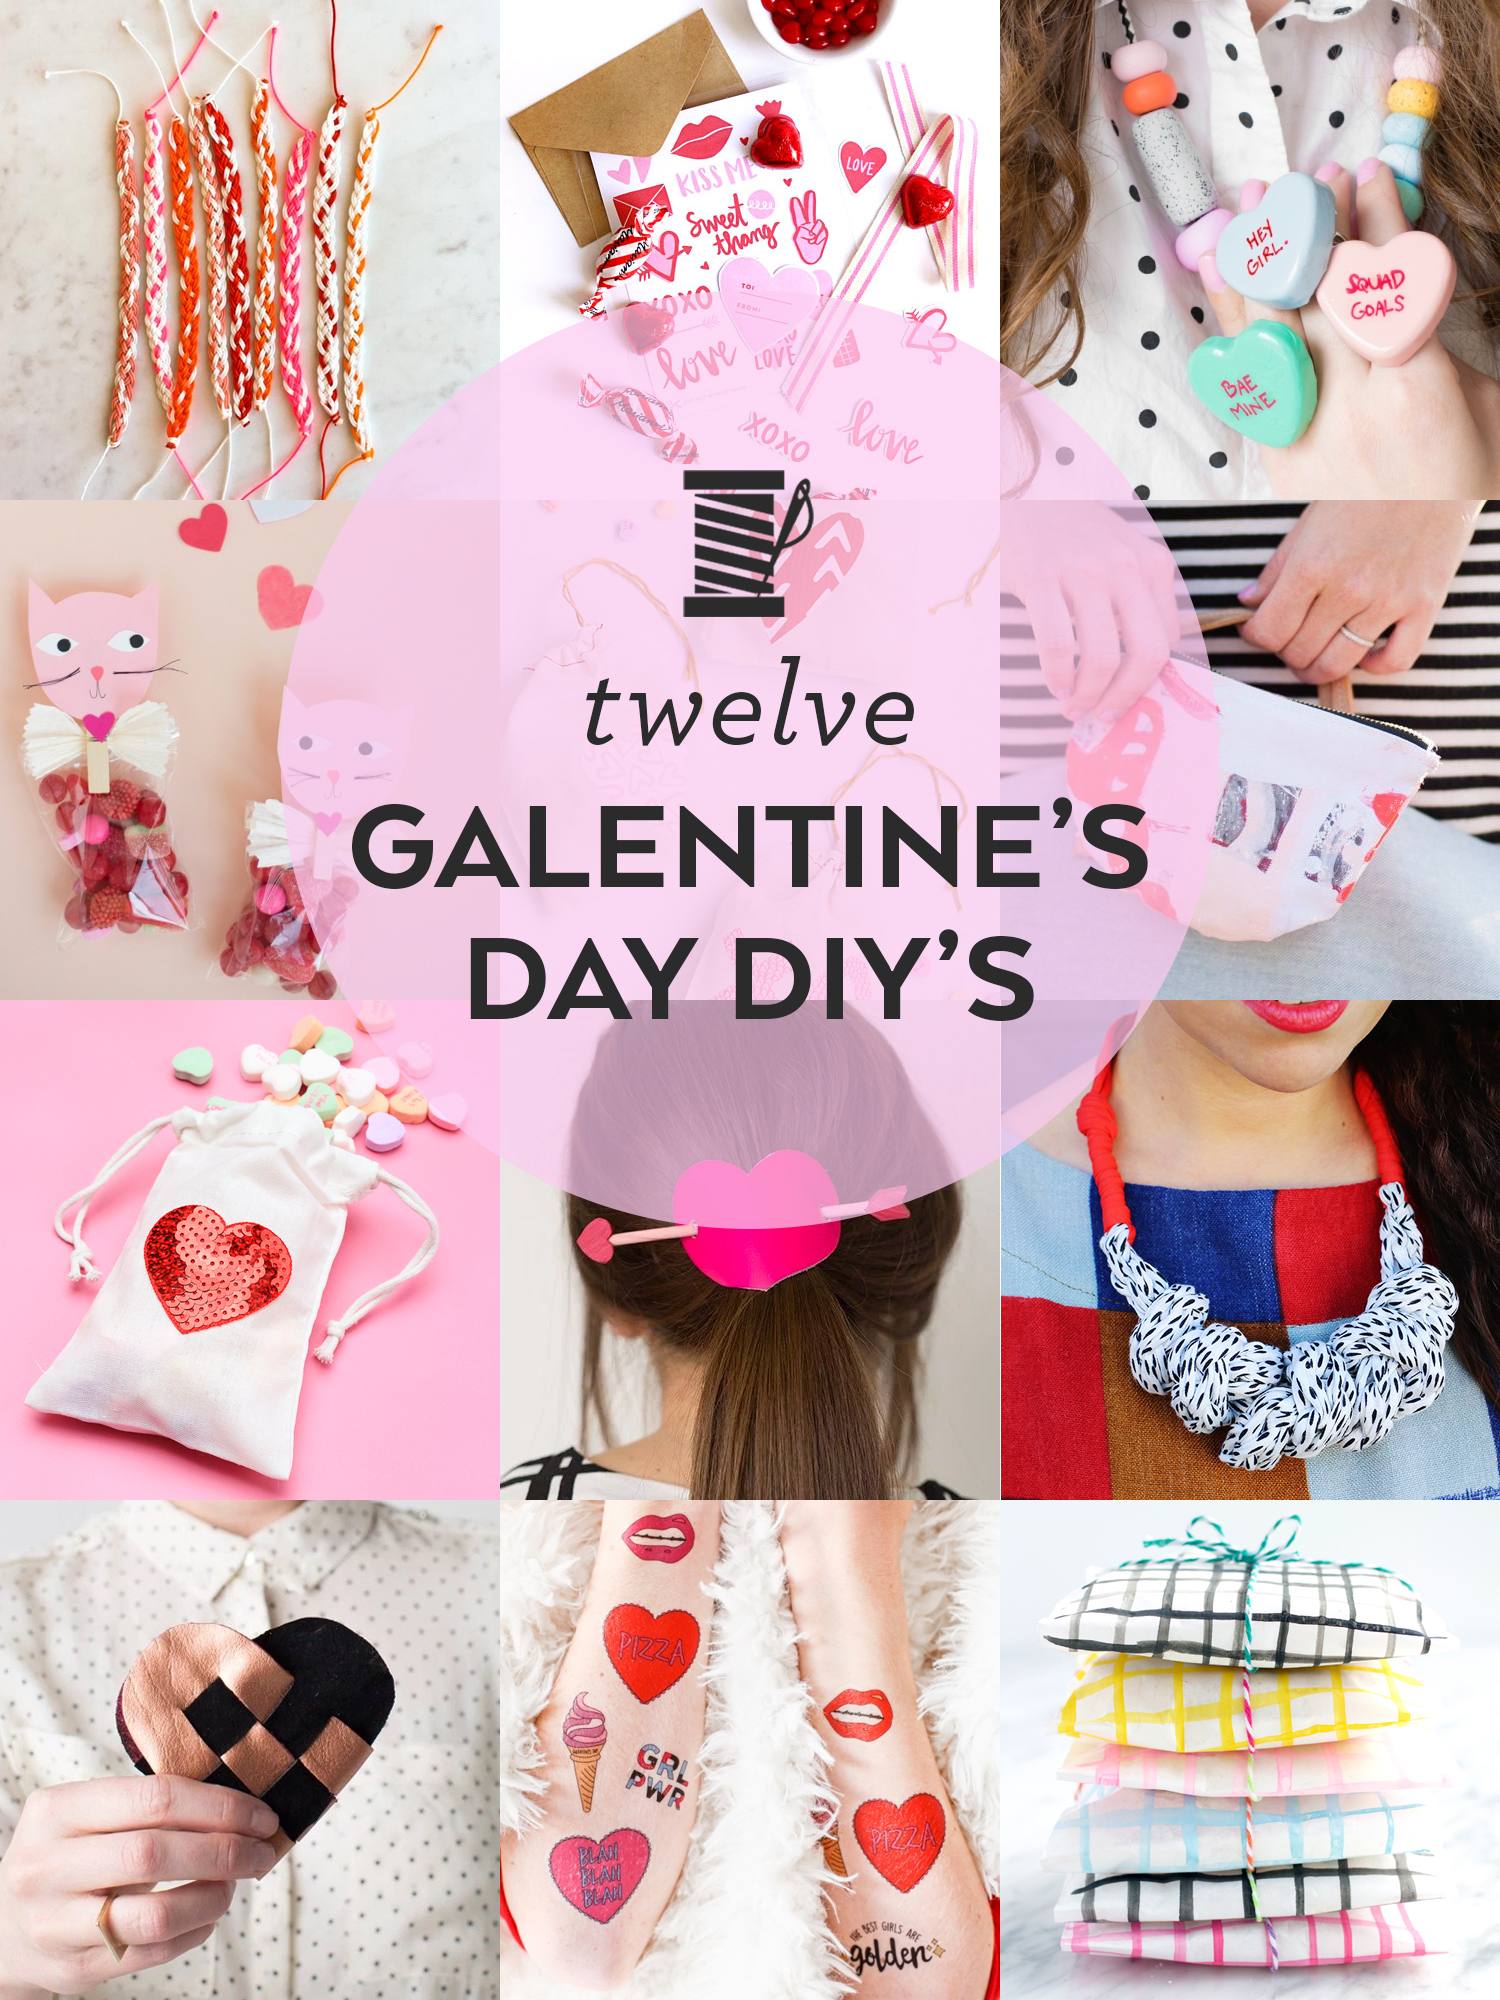 How To Create A Galentine's Gift Basket For Your Bestie - Teresa Caruso